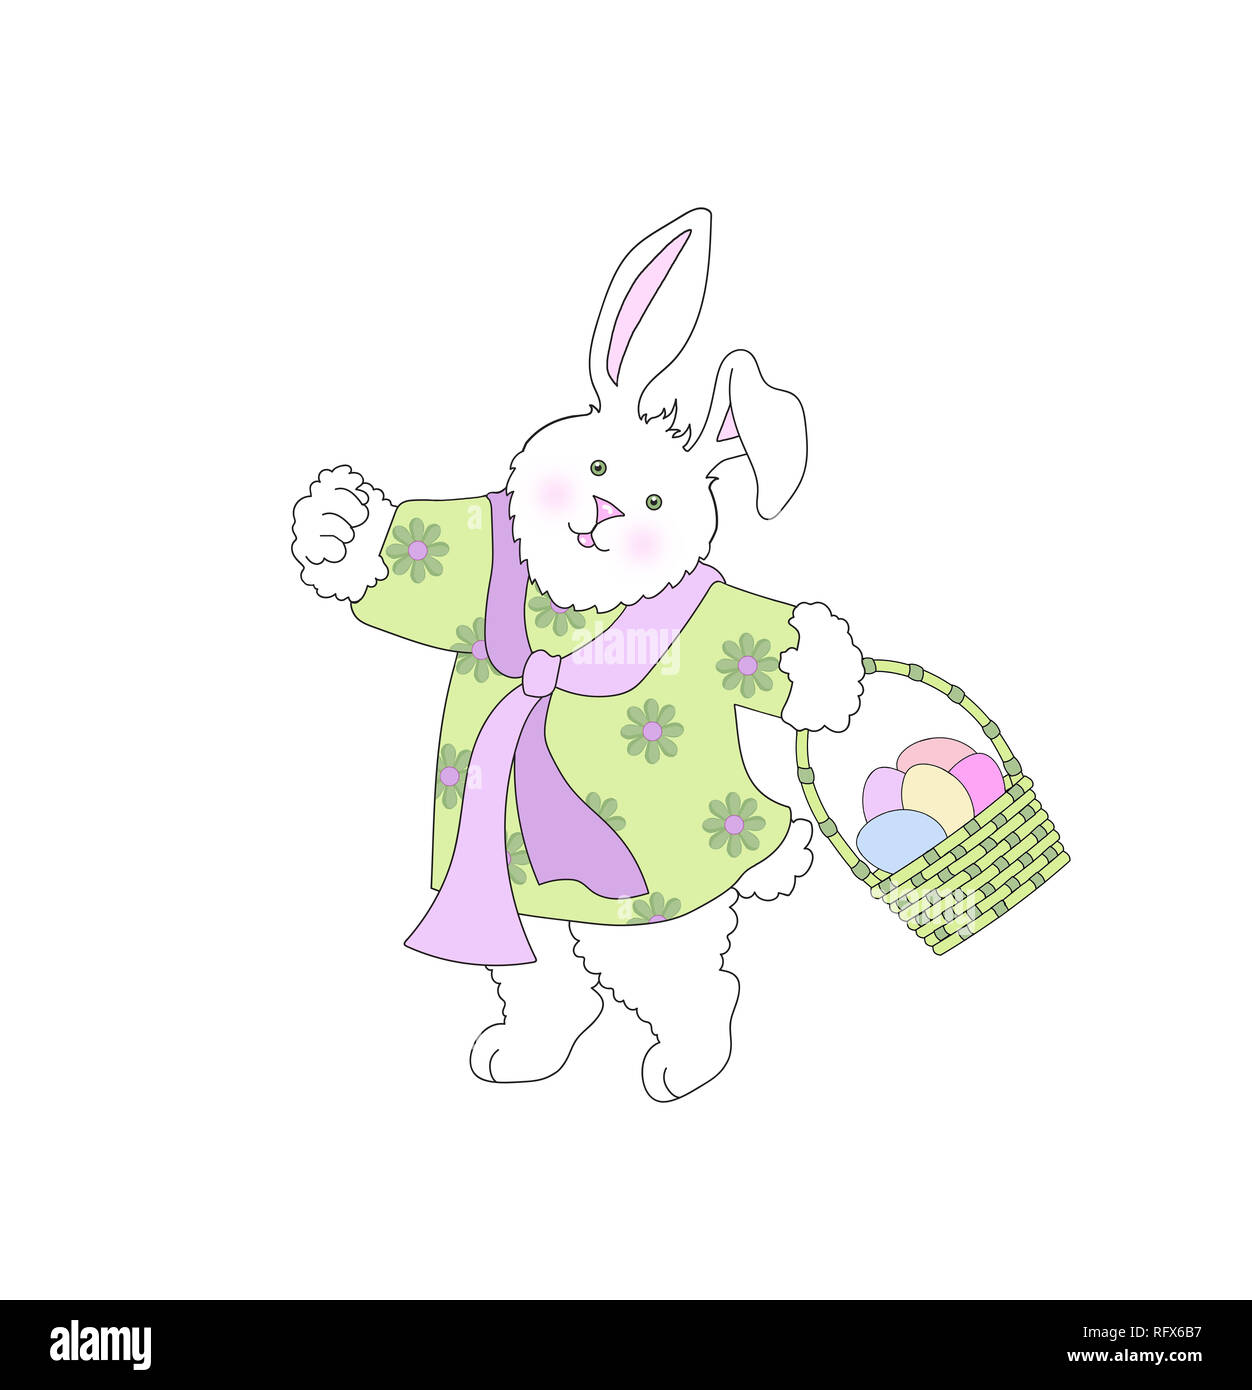 Illustration of a cute bunny rabbit wearing clothes and carrying an Easter basket on a white background Stock Photo